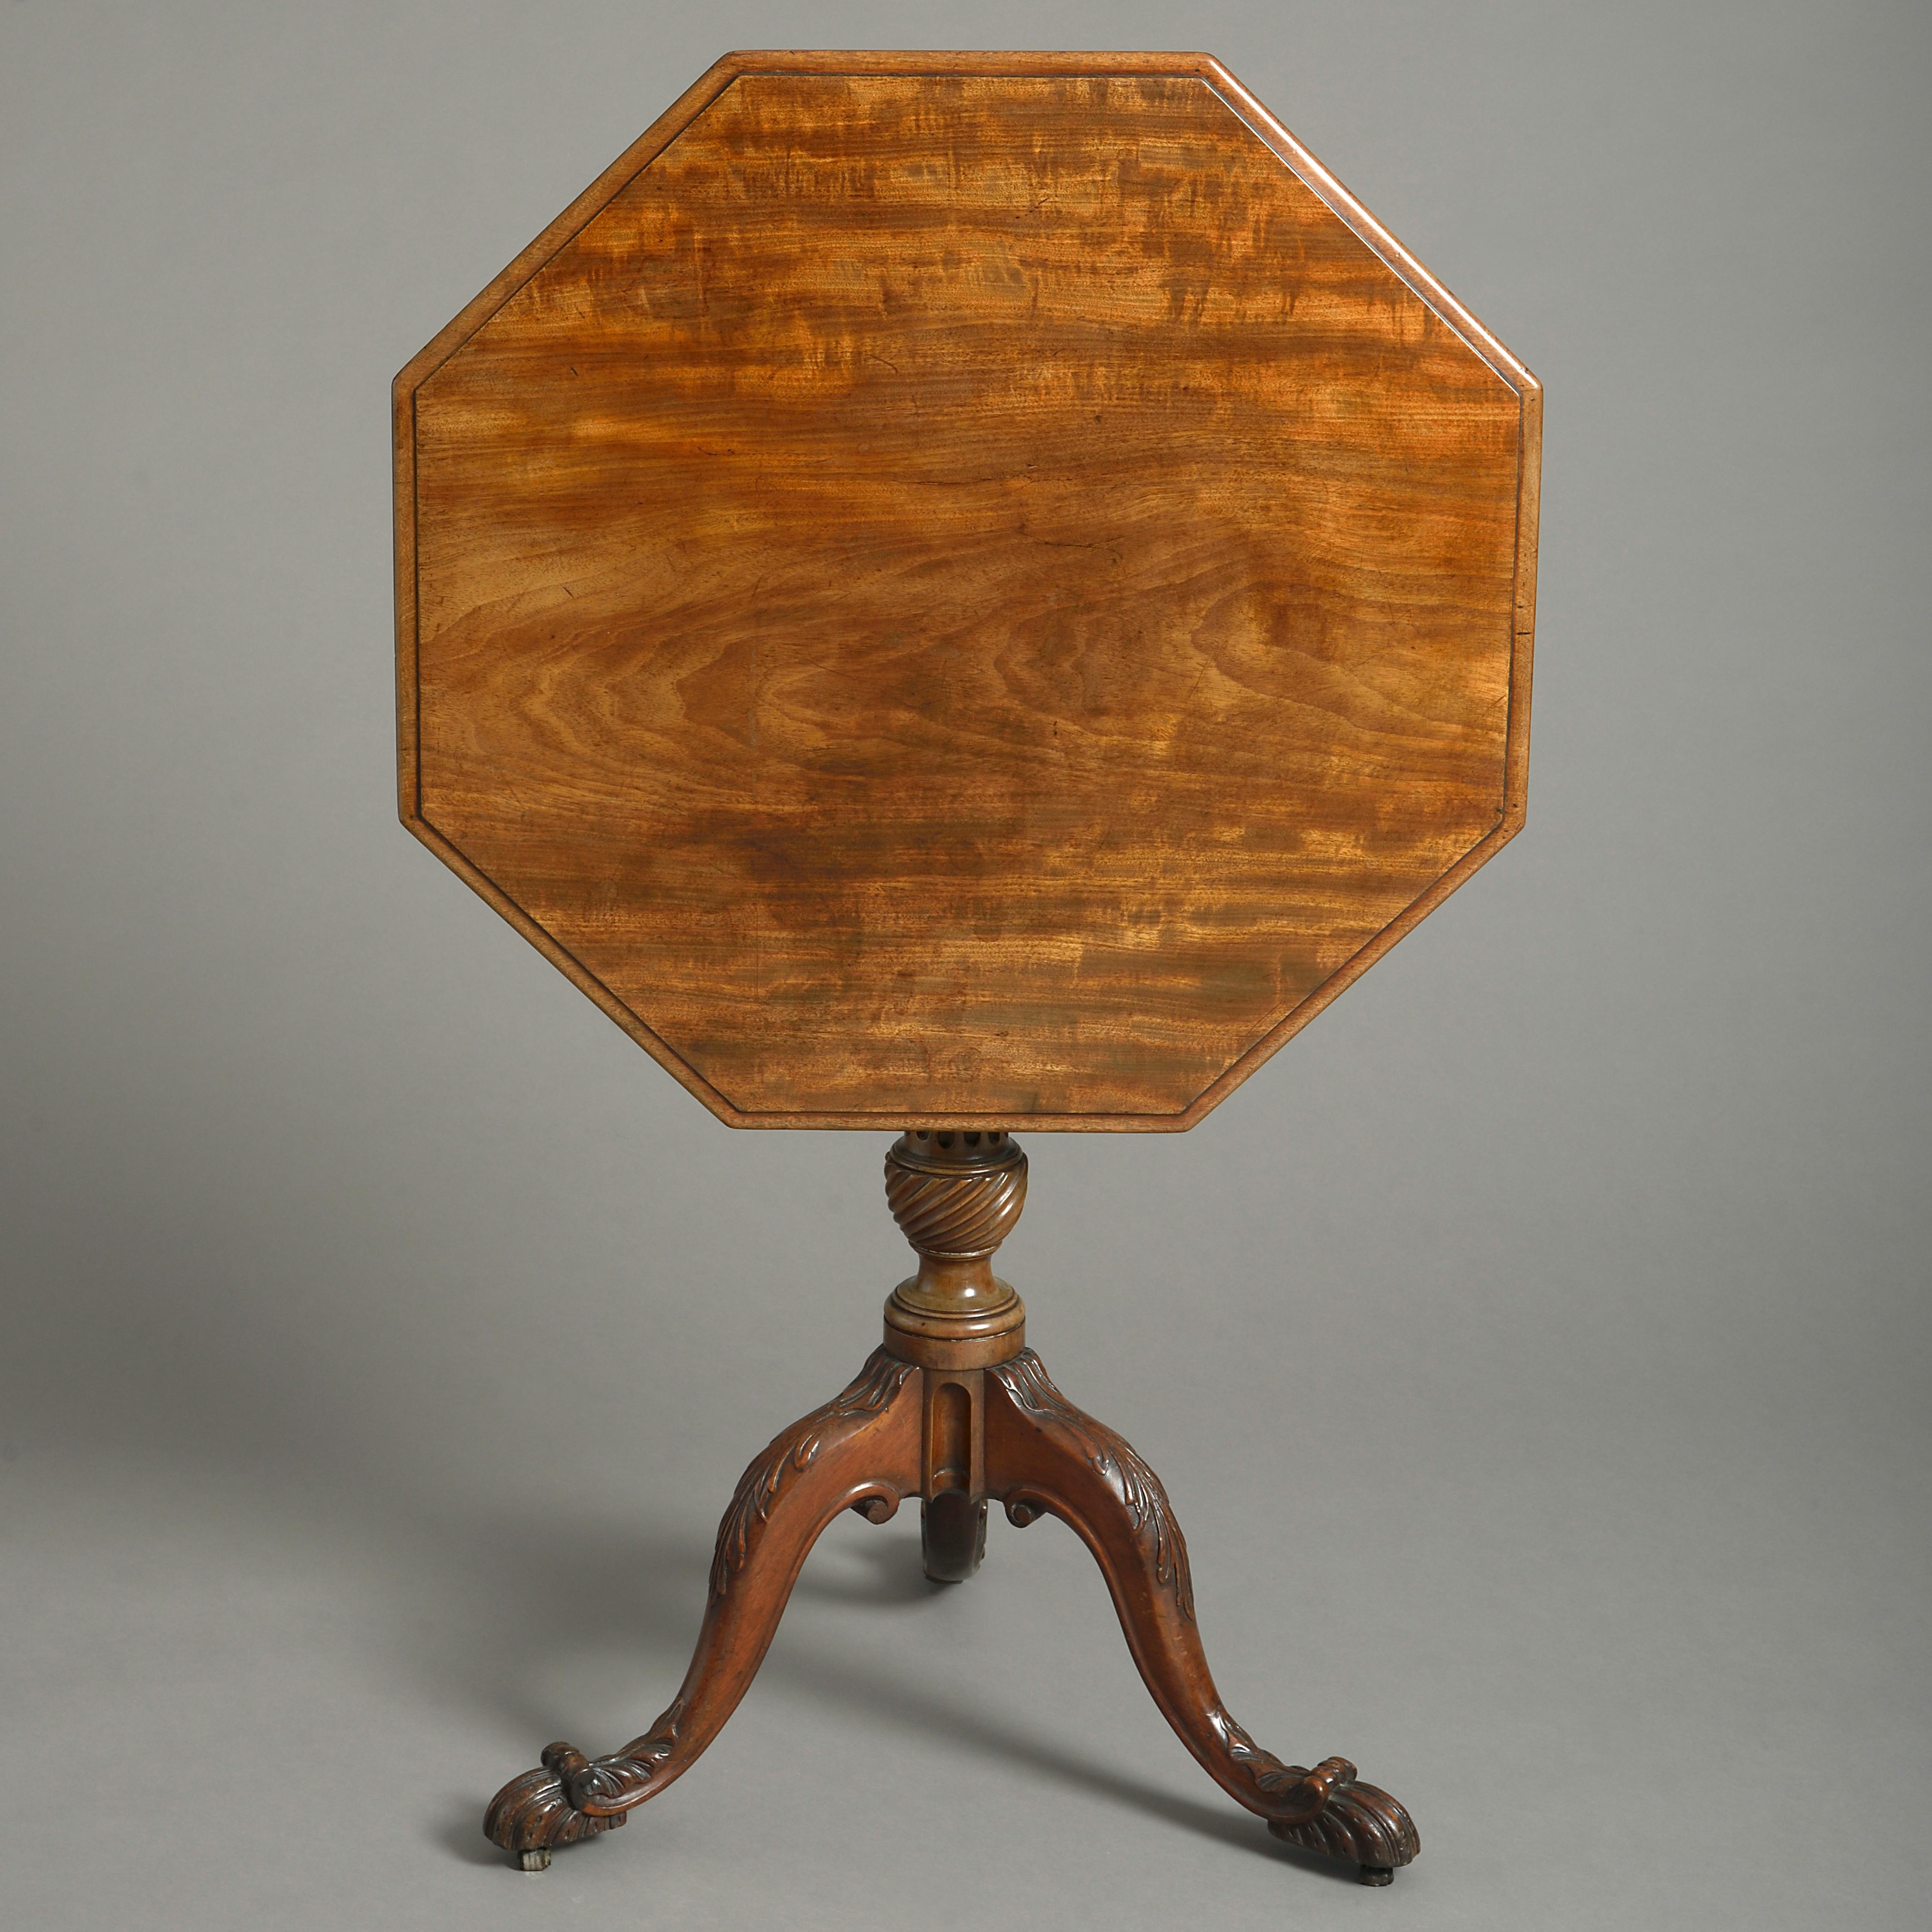 A George III period Thomas Chippendale style mahogany tripod table, having an octagonal figured top upon a turned fluted column stem with spiral base, all terminating in three cabriole legs with richly carved acanthus decoration and scrolling feet